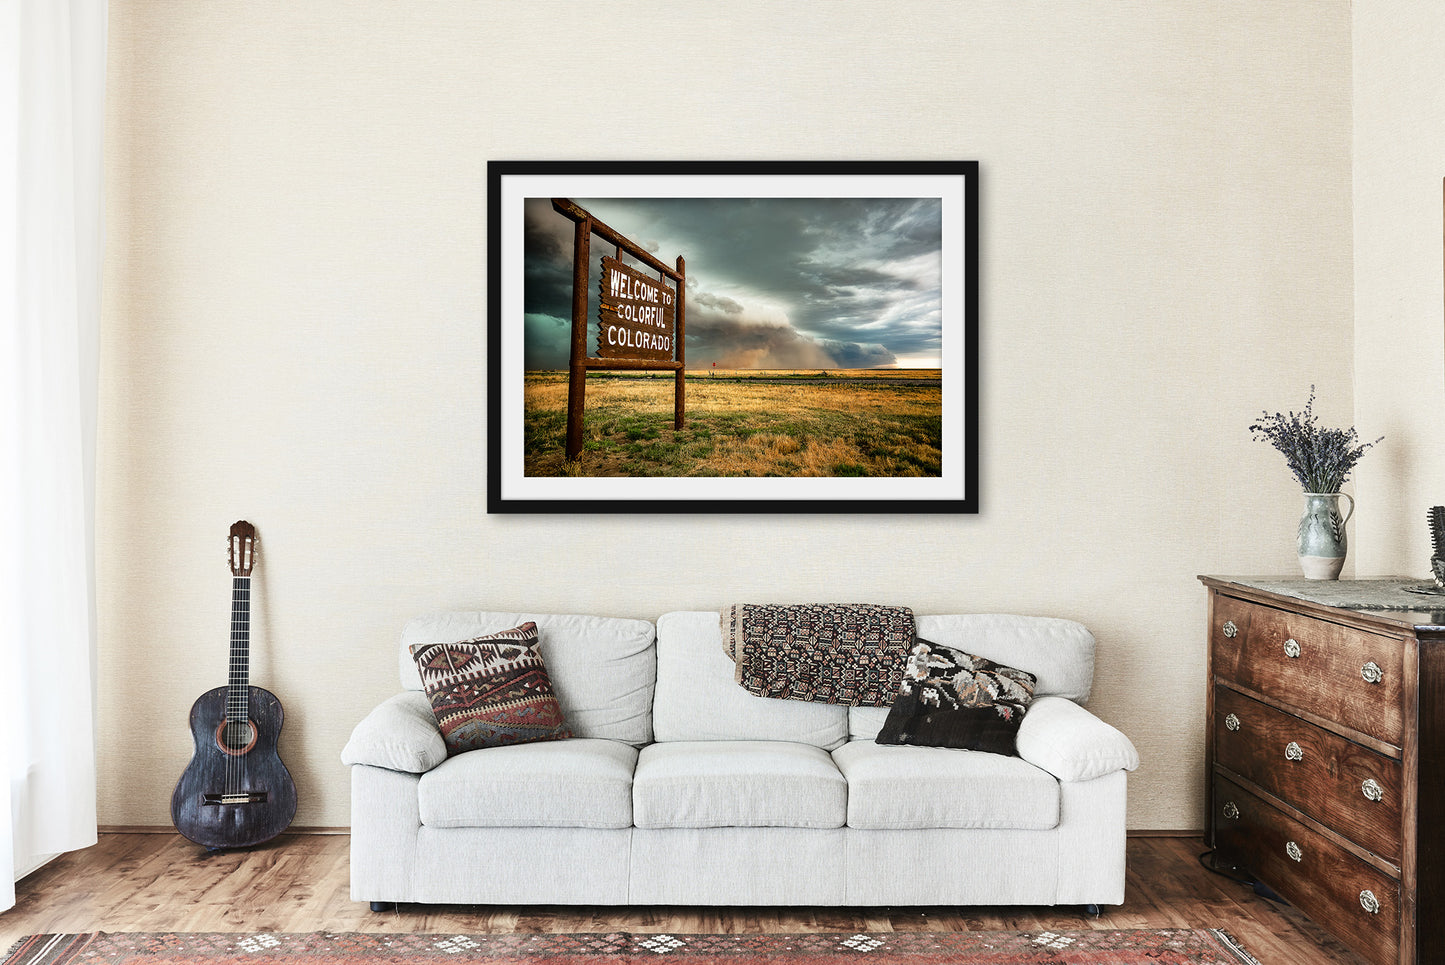 Framed Storm Print with Mat (Ready to Hang) Picture of Thunderstorm Advancing Past Colorful Colorado State Line Sign Great Plains Wall Art Western Decor